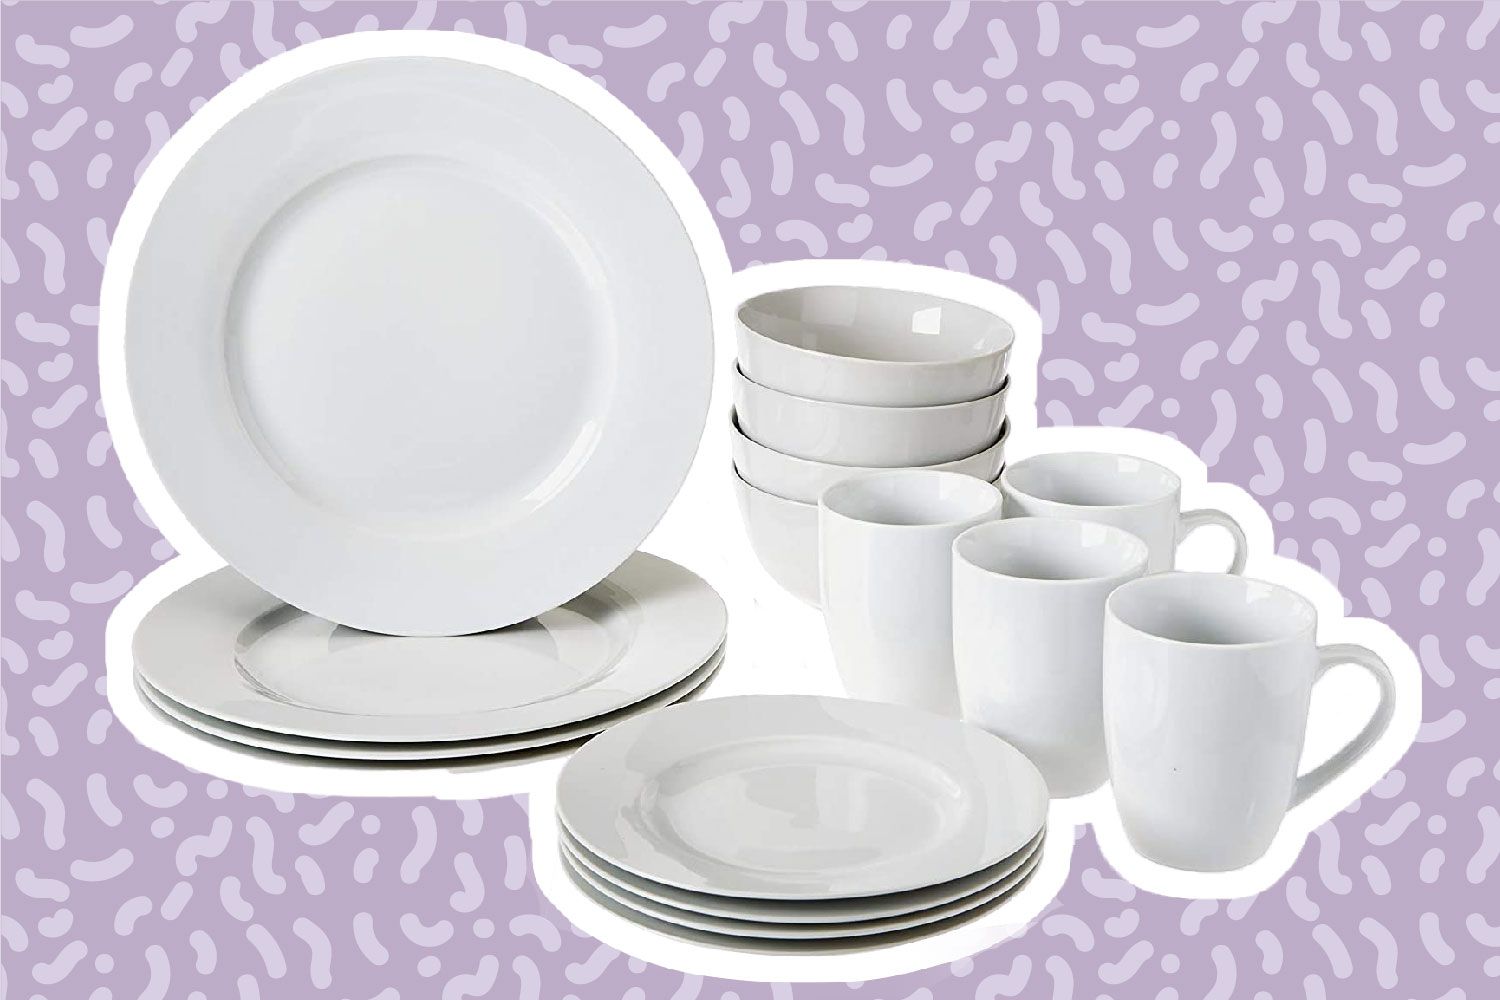 Tableware care rules